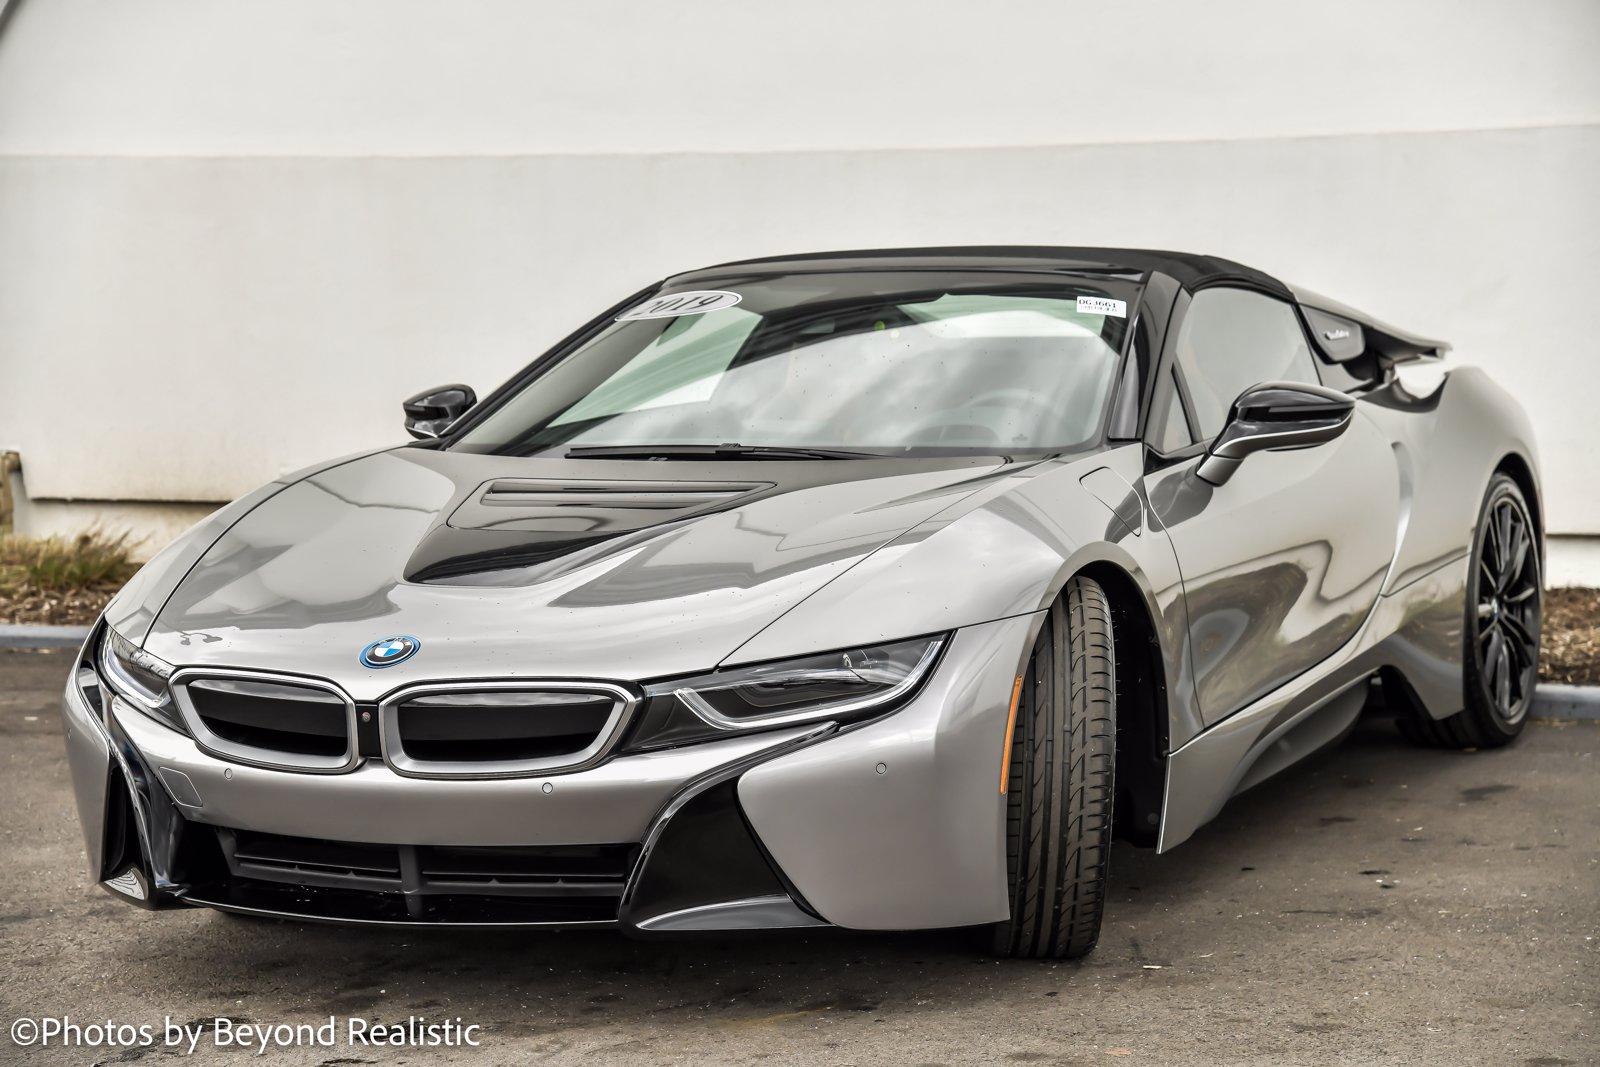 Used 2019 BMW i8  | Downers Grove, IL